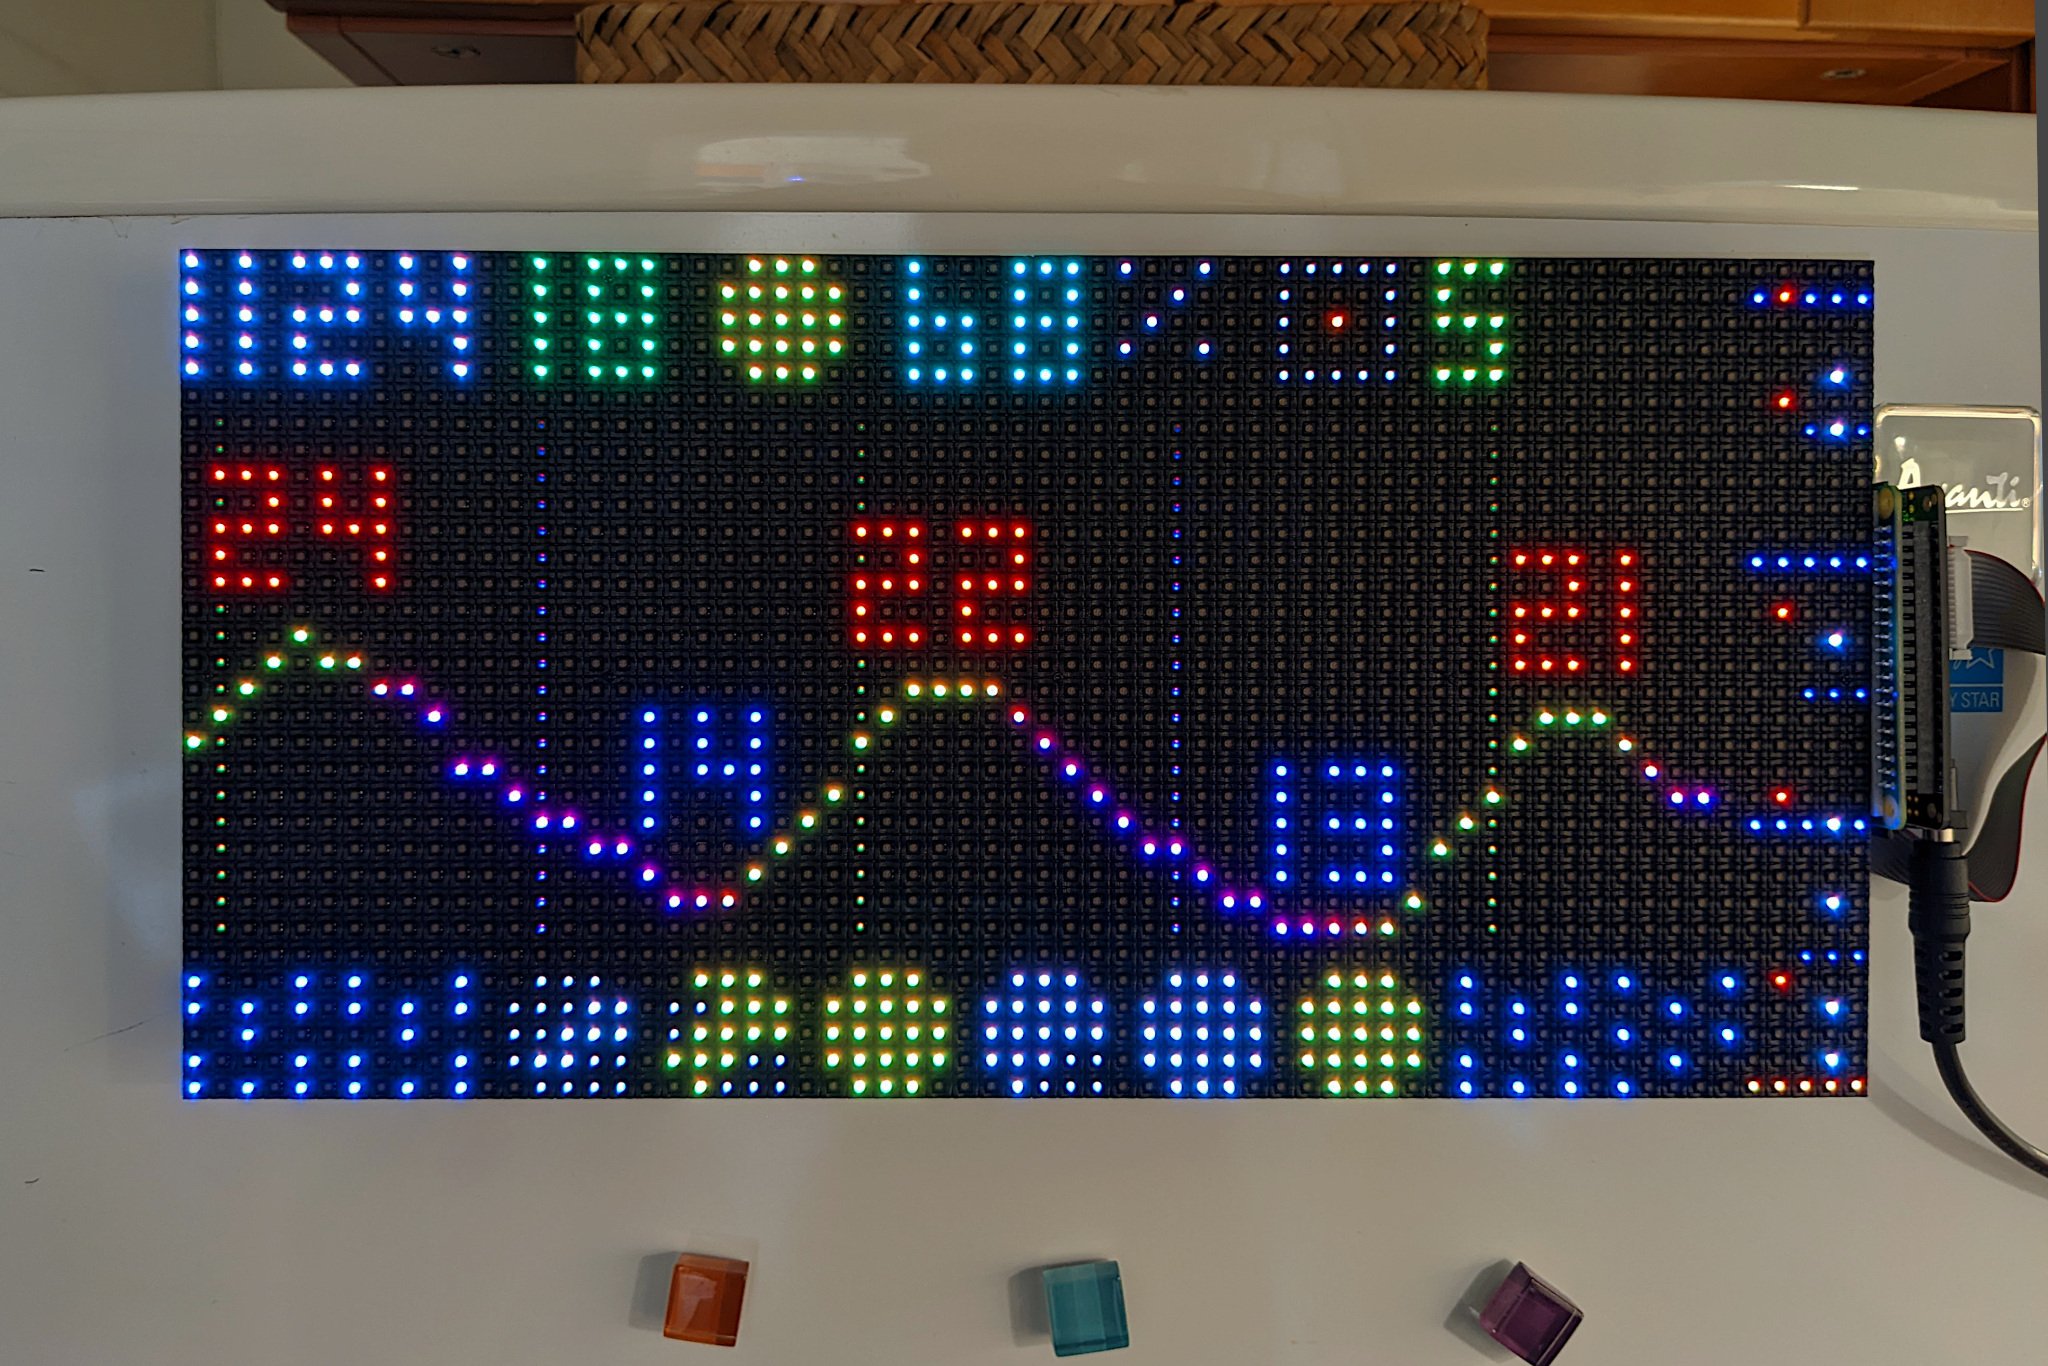 The LED matrix, attached to my fridge with magnetic screws. Raspberry Pi and “bonnet” board on the right edge.